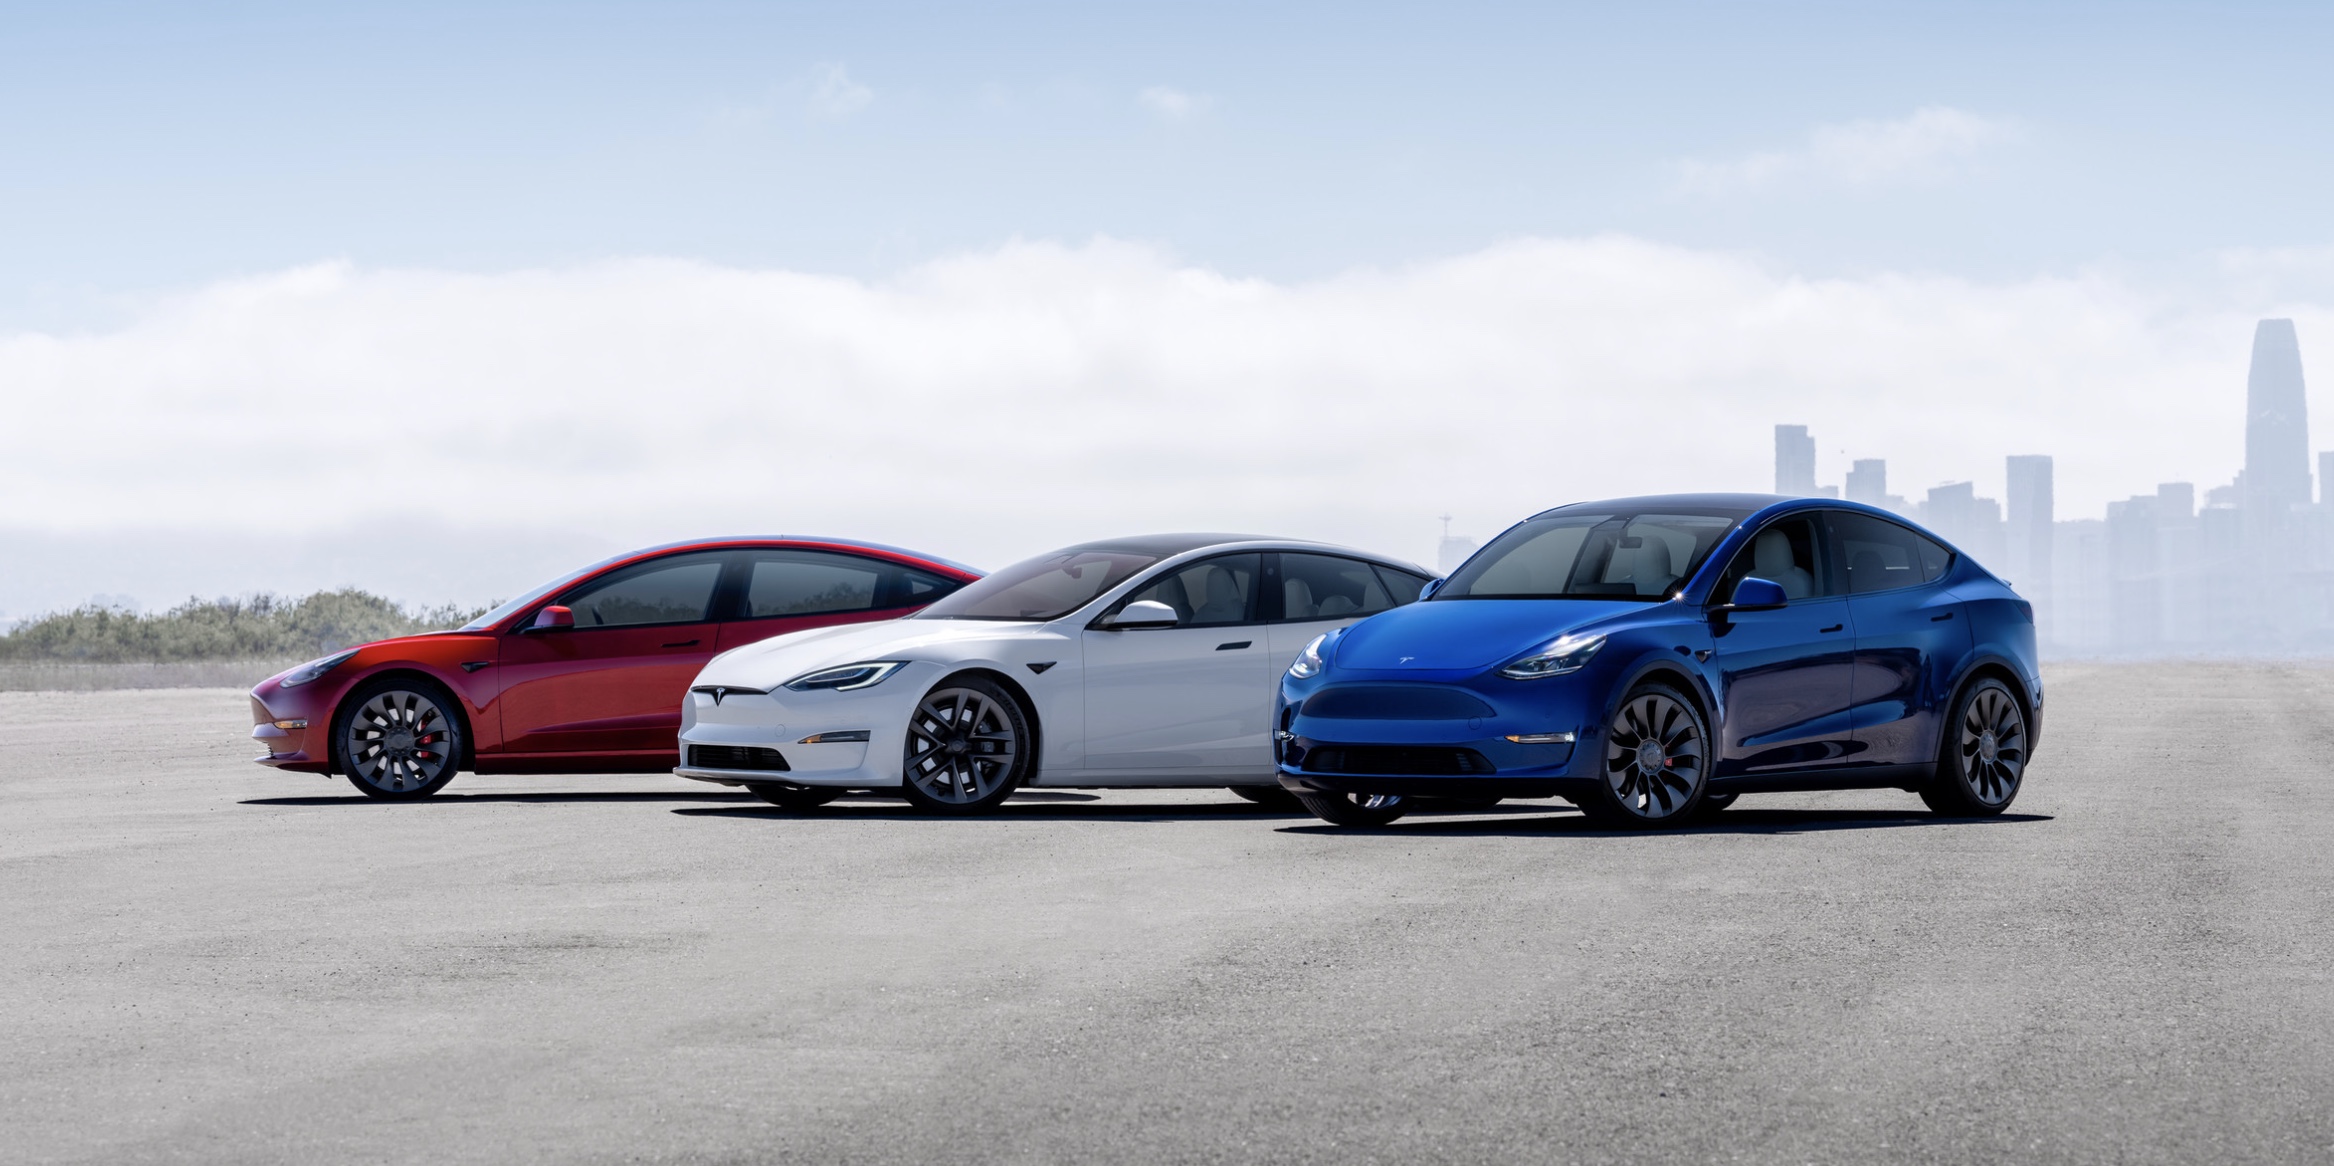 Tesla vehicles get added to $4,000 used EV credit, if you can find one  under $25,000